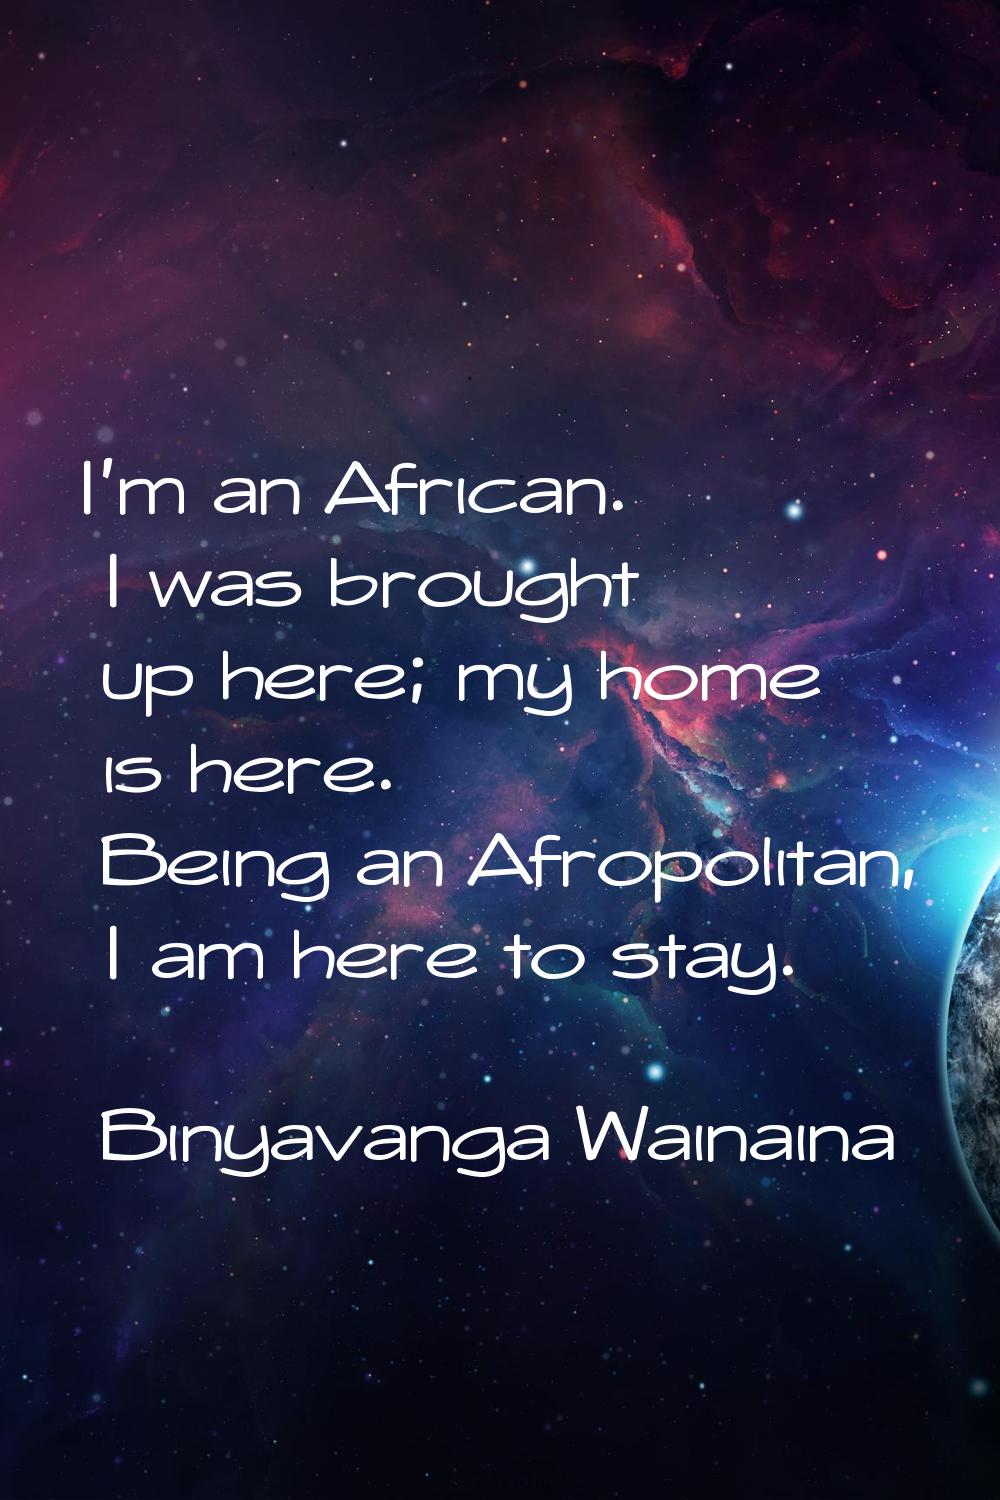 I'm an African. I was brought up here; my home is here. Being an Afropolitan, I am here to stay.